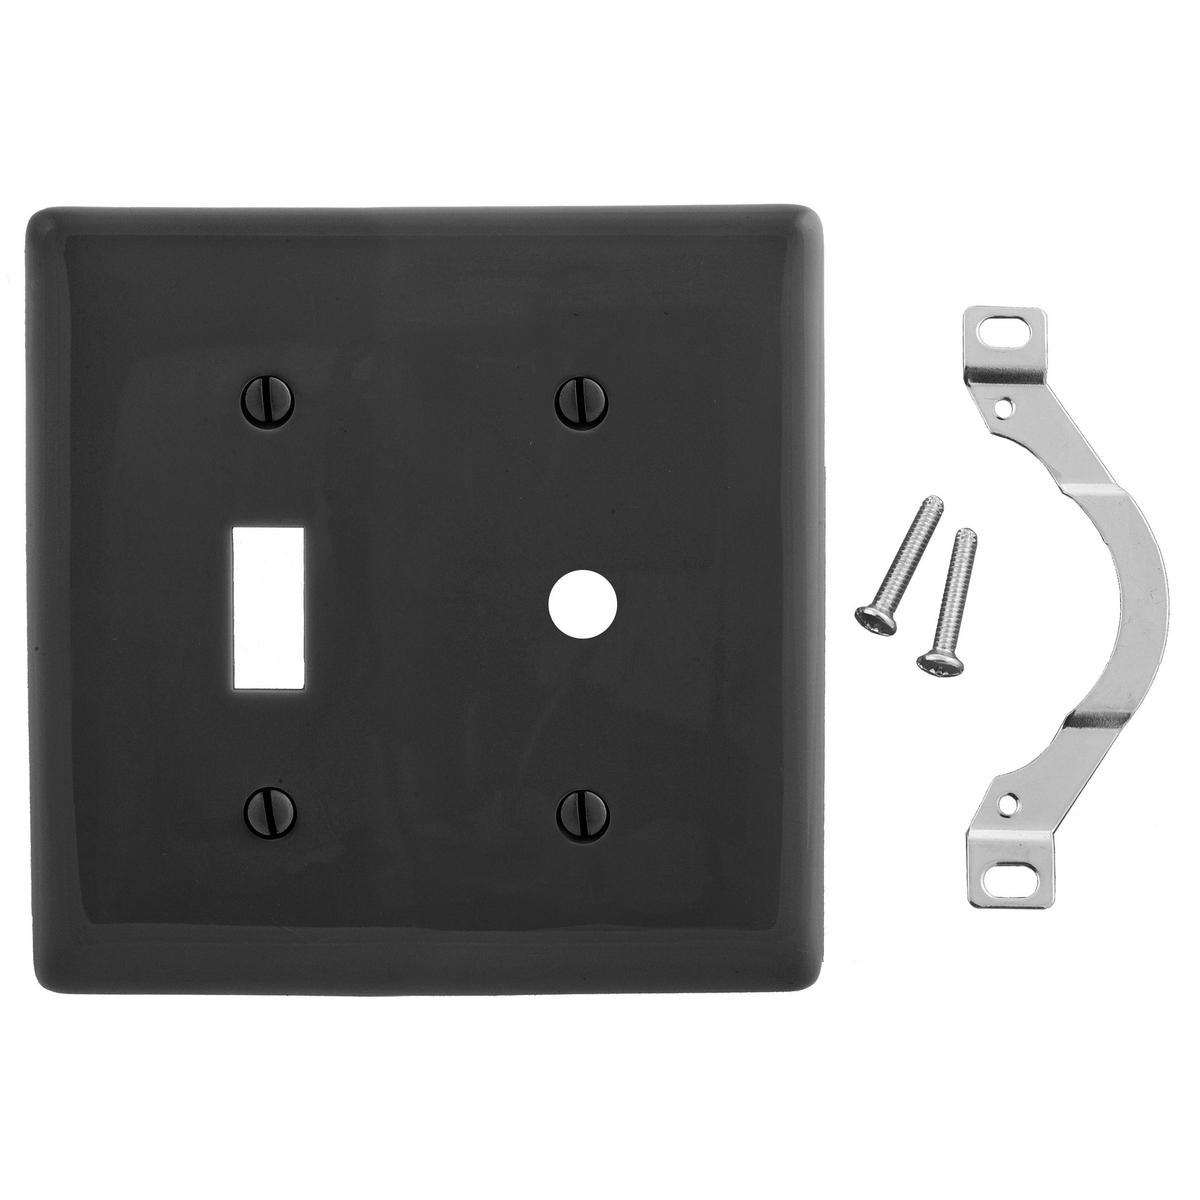 Hubbell NP112BK Wallplates, Nylon, 2-Gang, 1) Toggle, 1) .406" Opening, Black  ; Reinforcement ribs for extra strength ; High-impact, self-extinguishing nylon material ; Captive screw feature holds mounting screw in place ; Standard Size is 1/8" larger to give you extra 